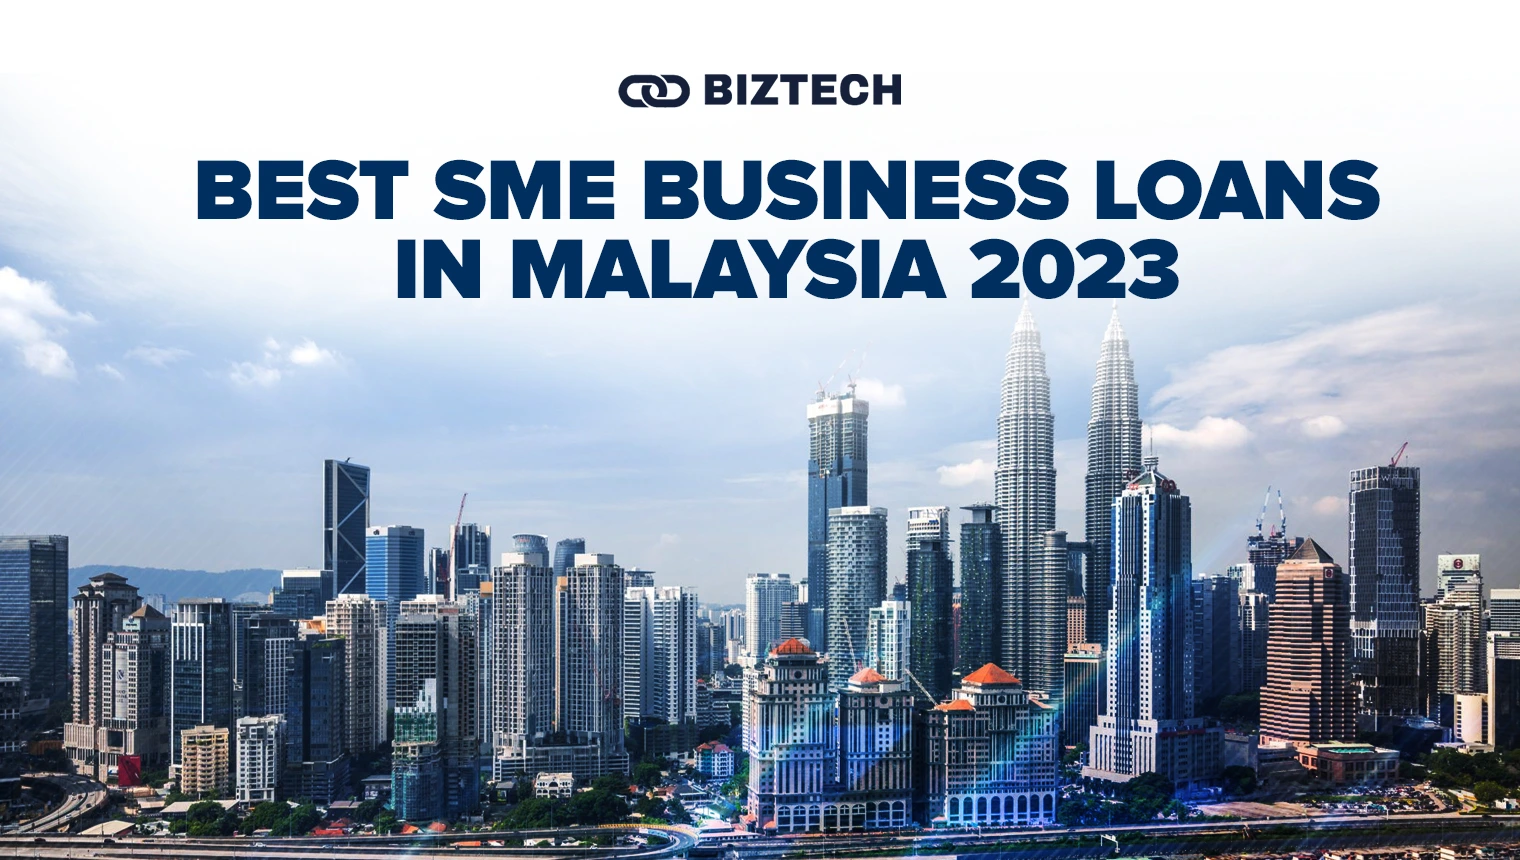 BizTech Community | Personal Finance | Guide to Best Small Business / SME Loans in Malaysia (2023)